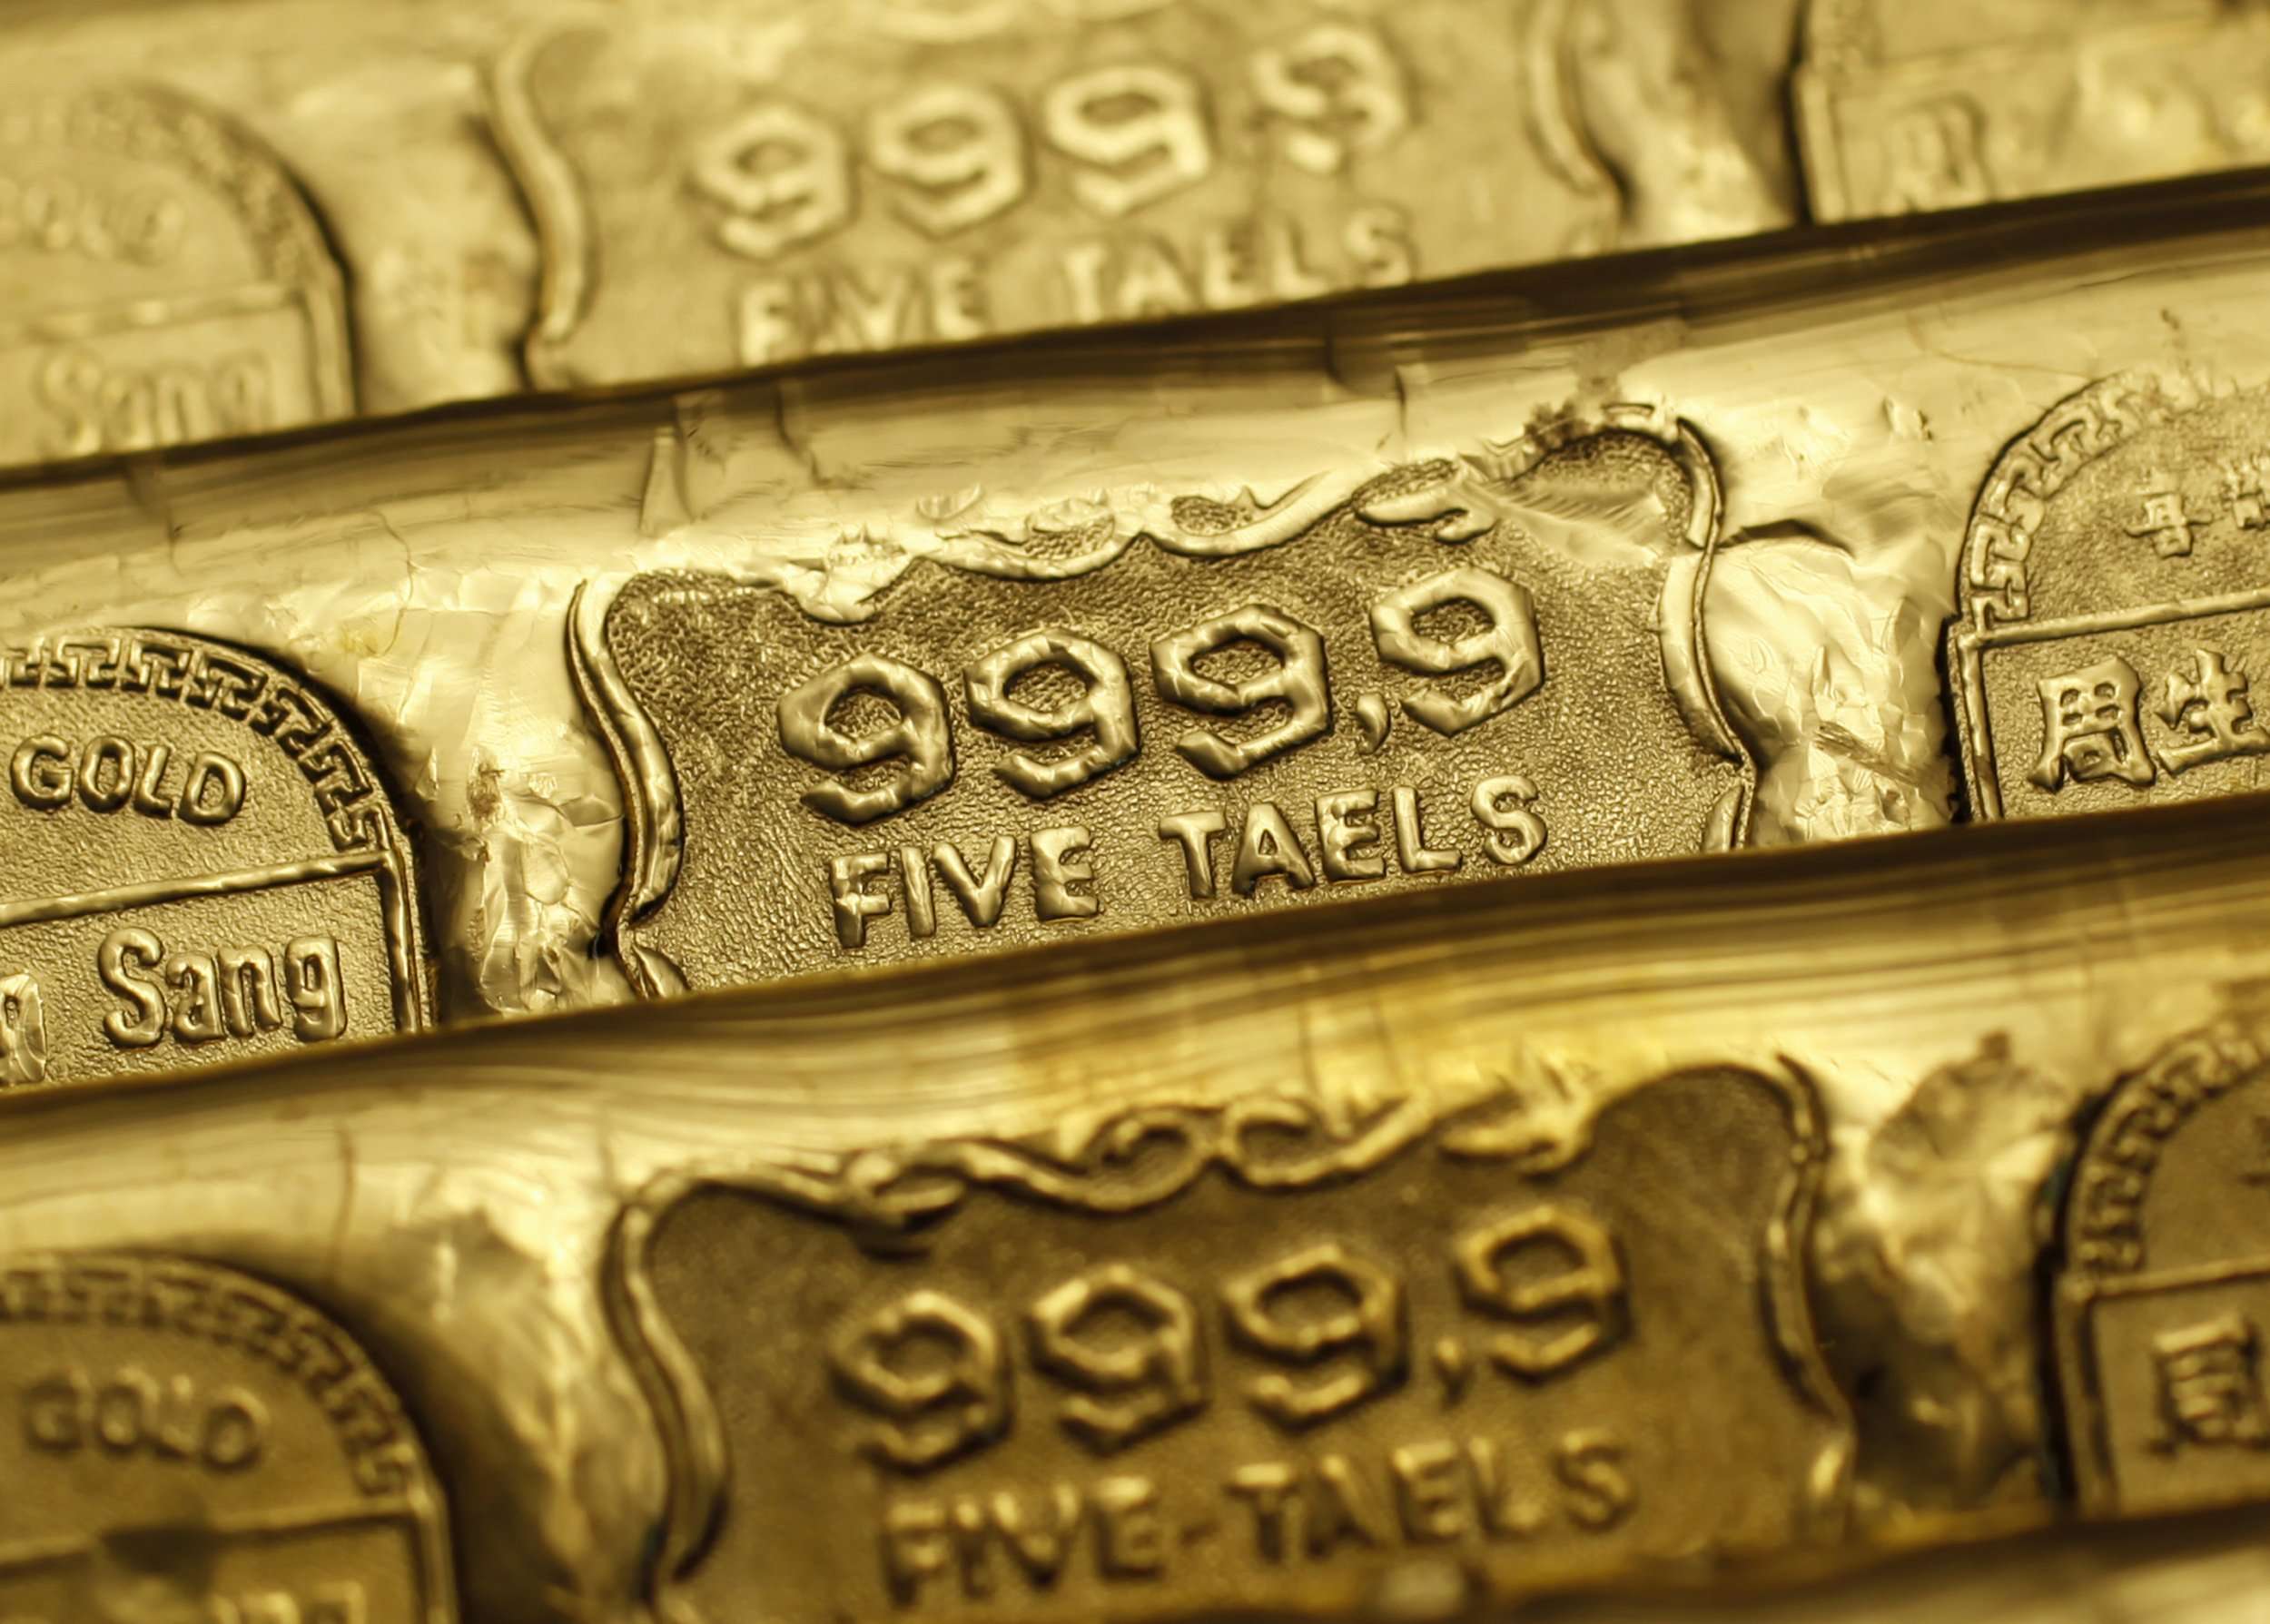 Five-tael (6.65 ounces or 190 grams) gold bars on sale at a jewellery store in Hong Kong. Photo: Reuters